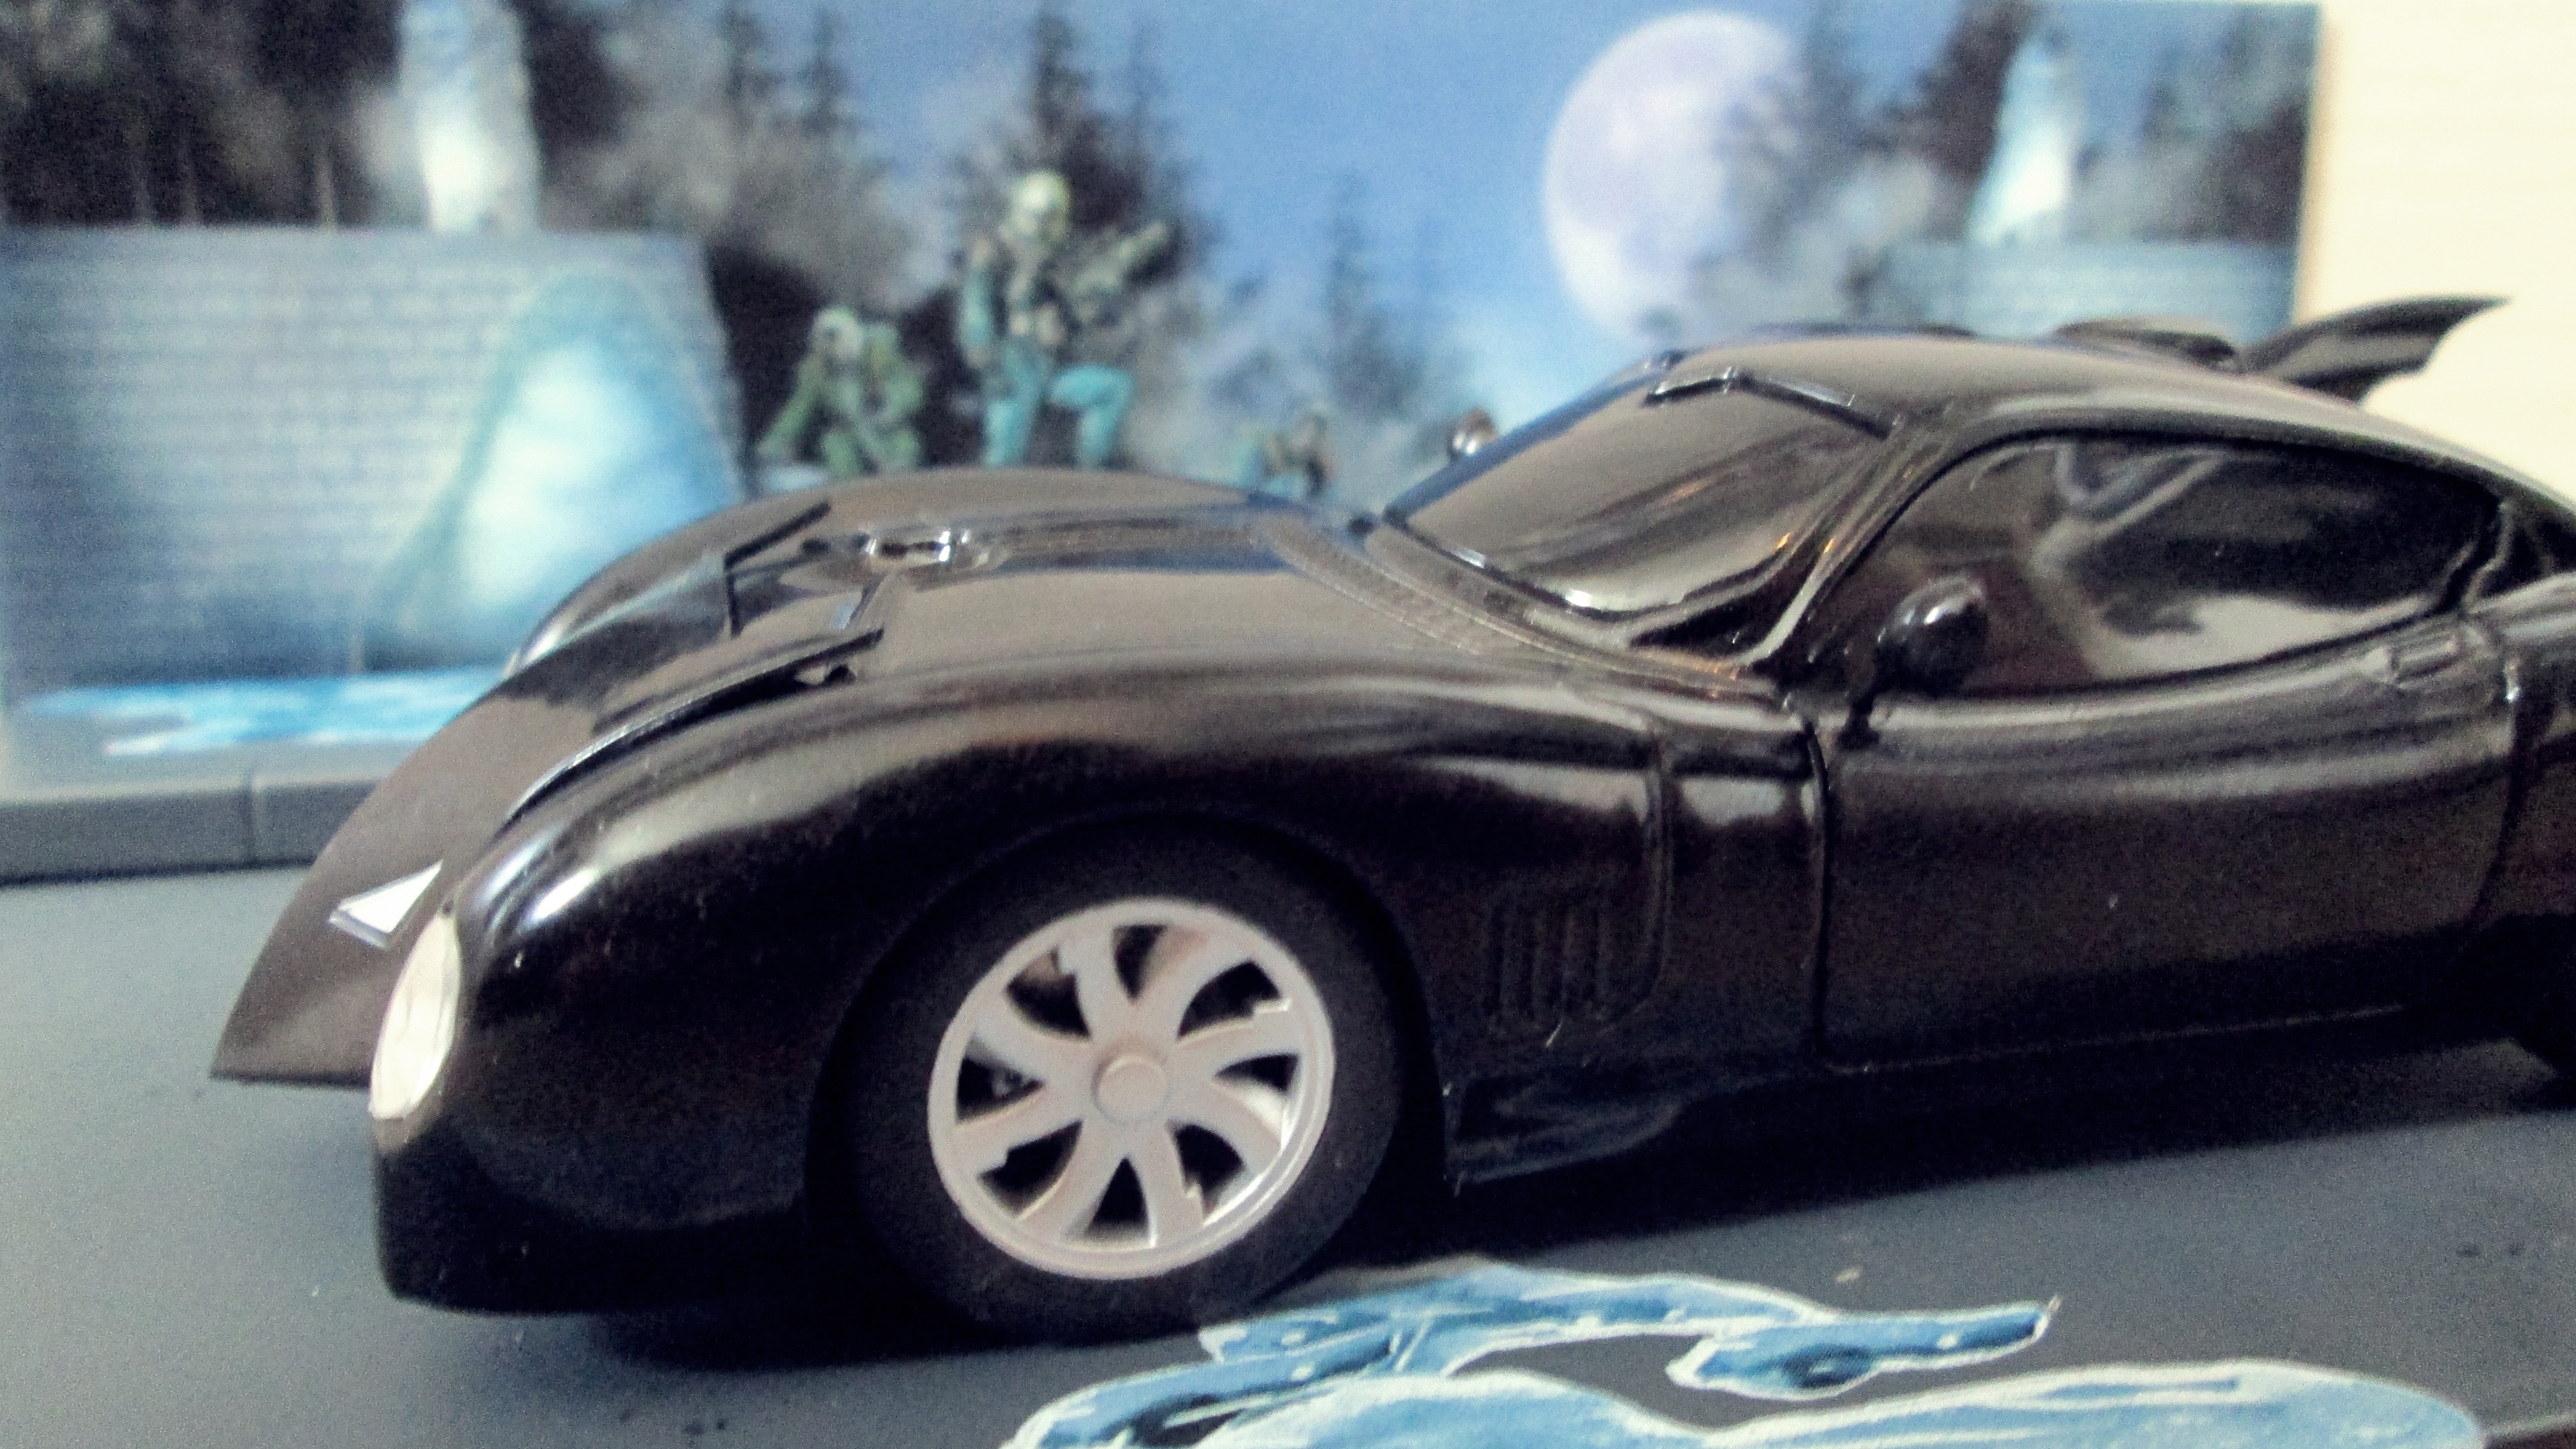 Batmobile Collection: Detective Comics #575 | Flickr - Photo Sharing!